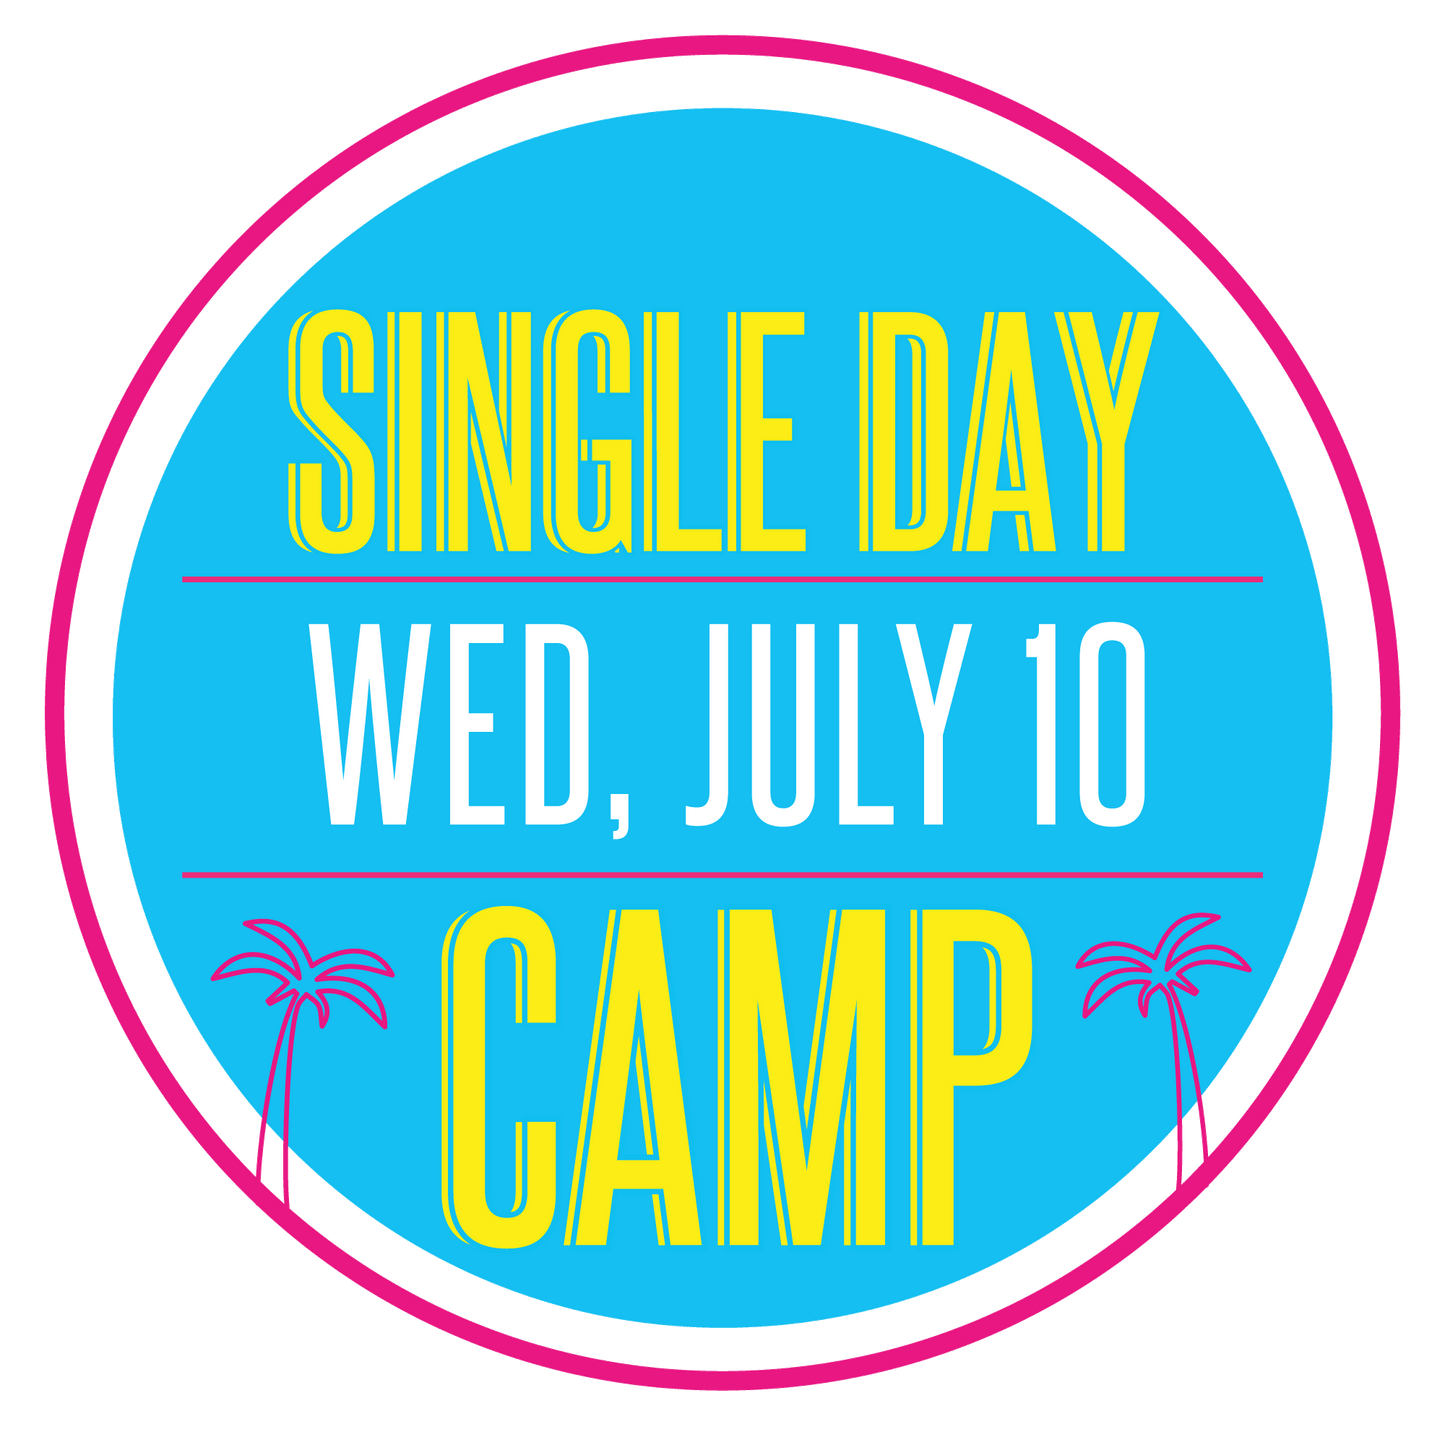 Single Day Sewing Workshop: Wednesday, July 10, 9am-3pm